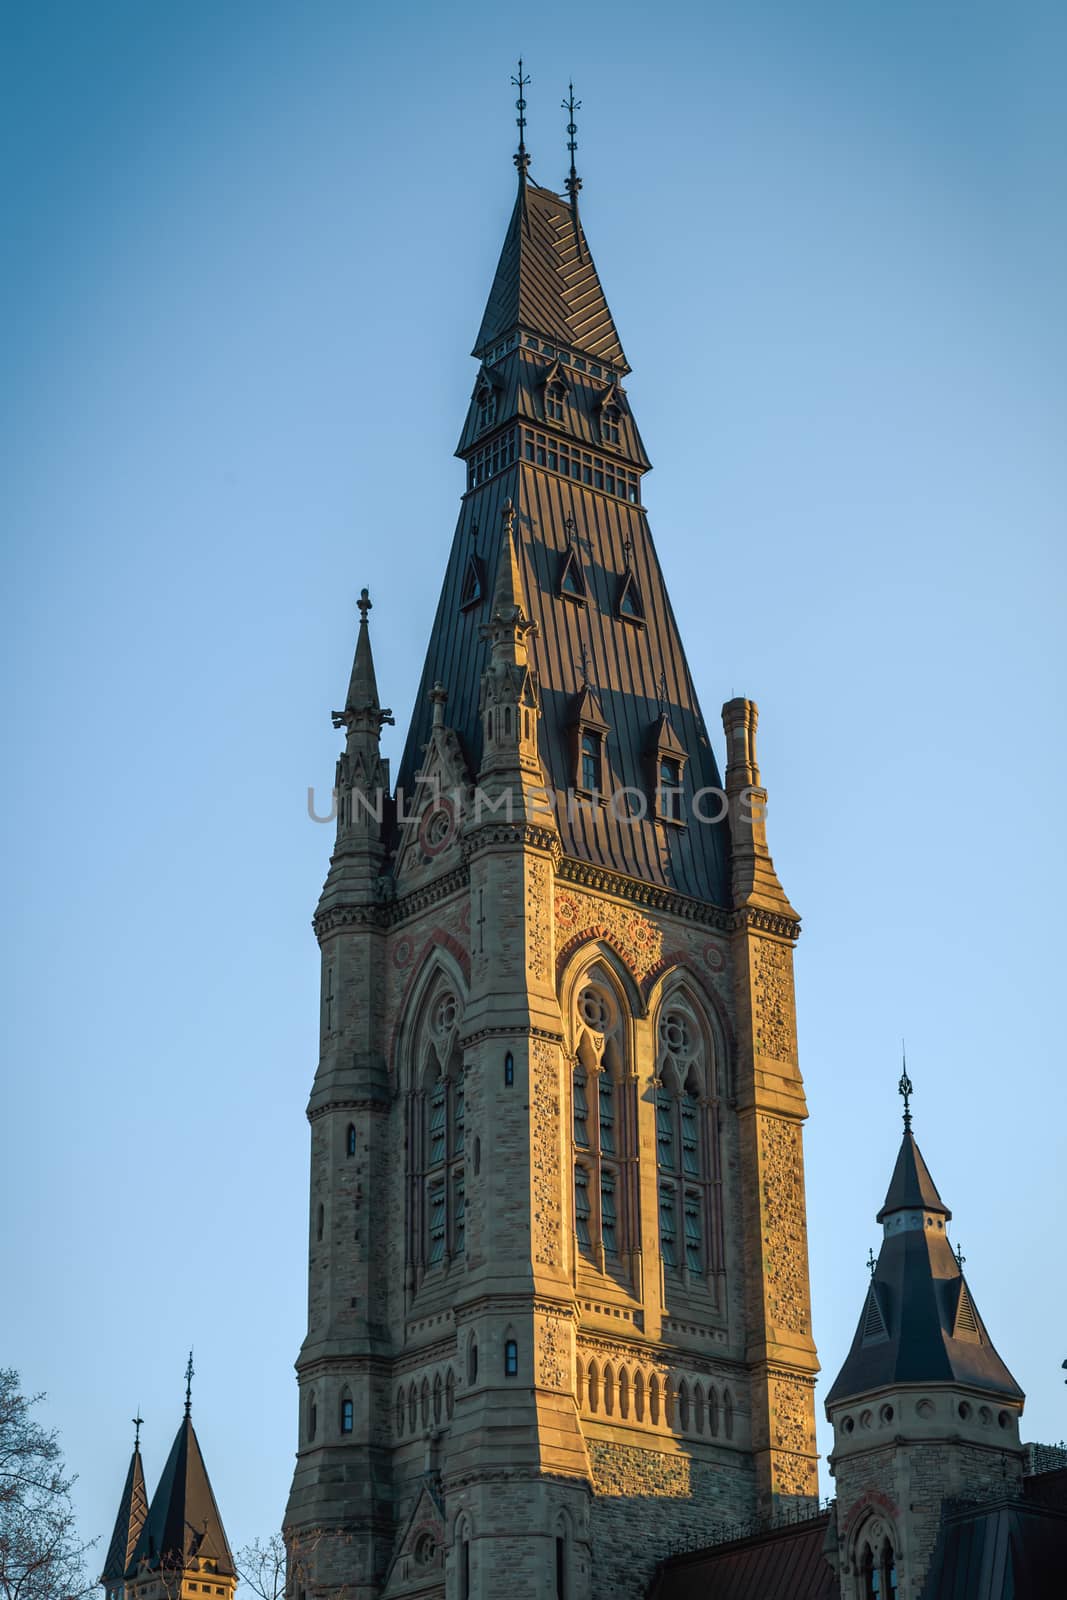 Mackenzie Tower in Ottawa's Parliament Buildings by colintemple